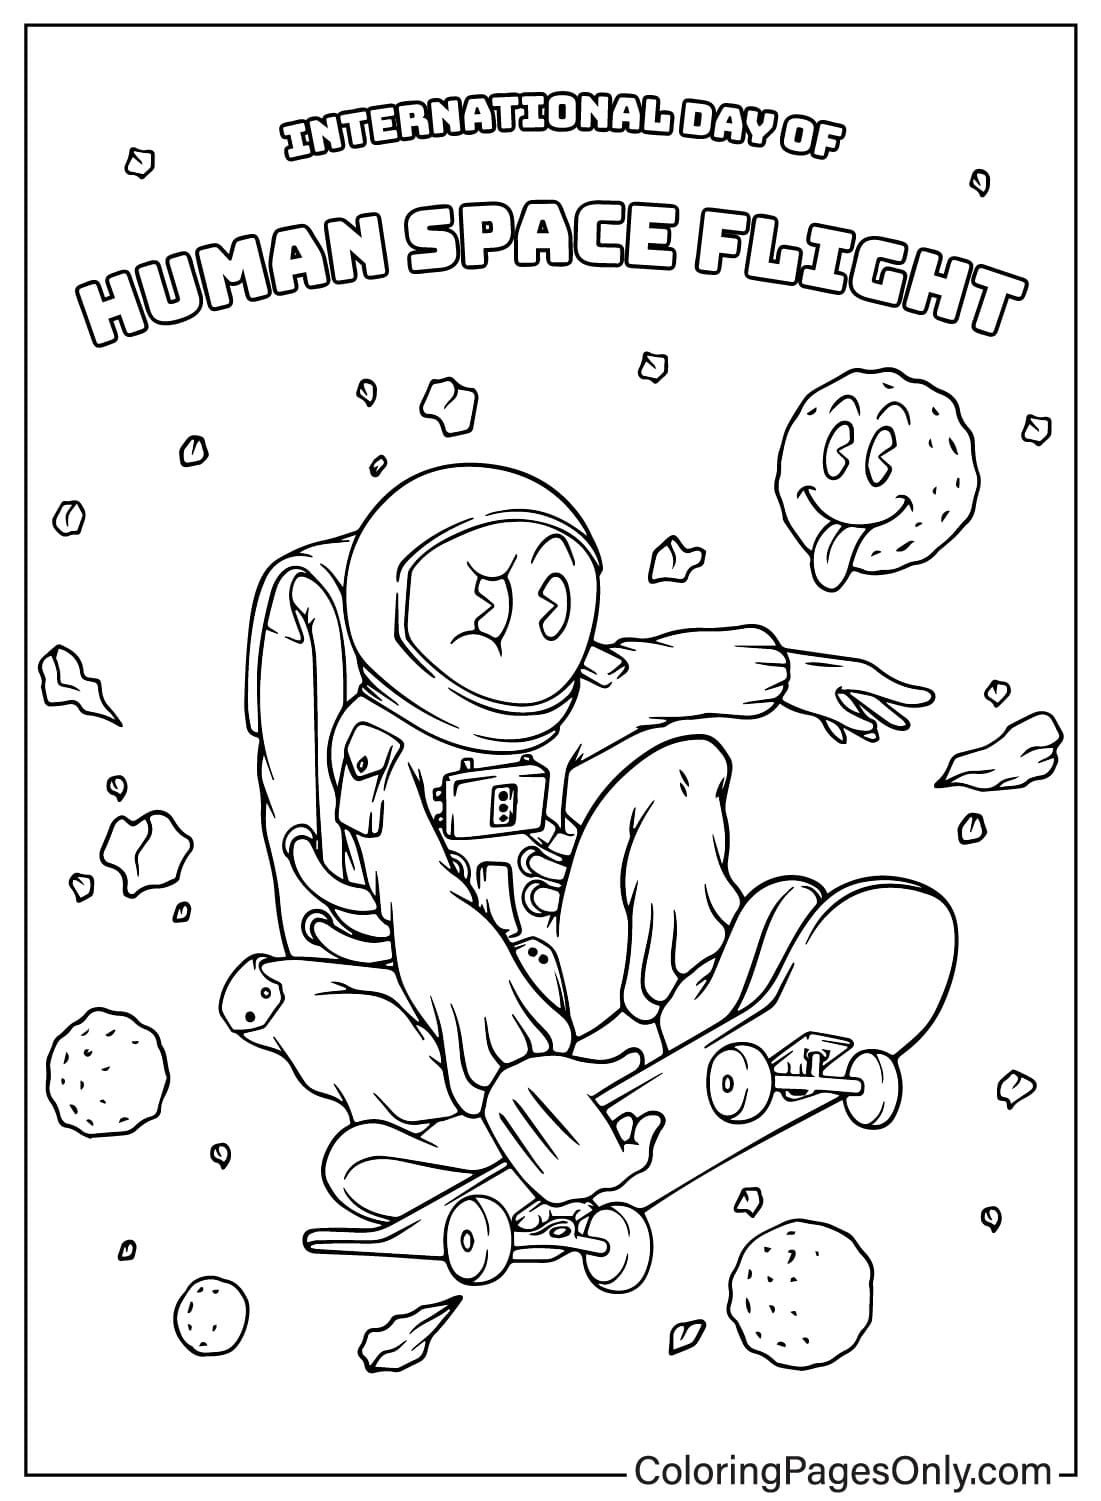 Coloring Page International Day of Human Space Flight from International Day of Human Space Flight